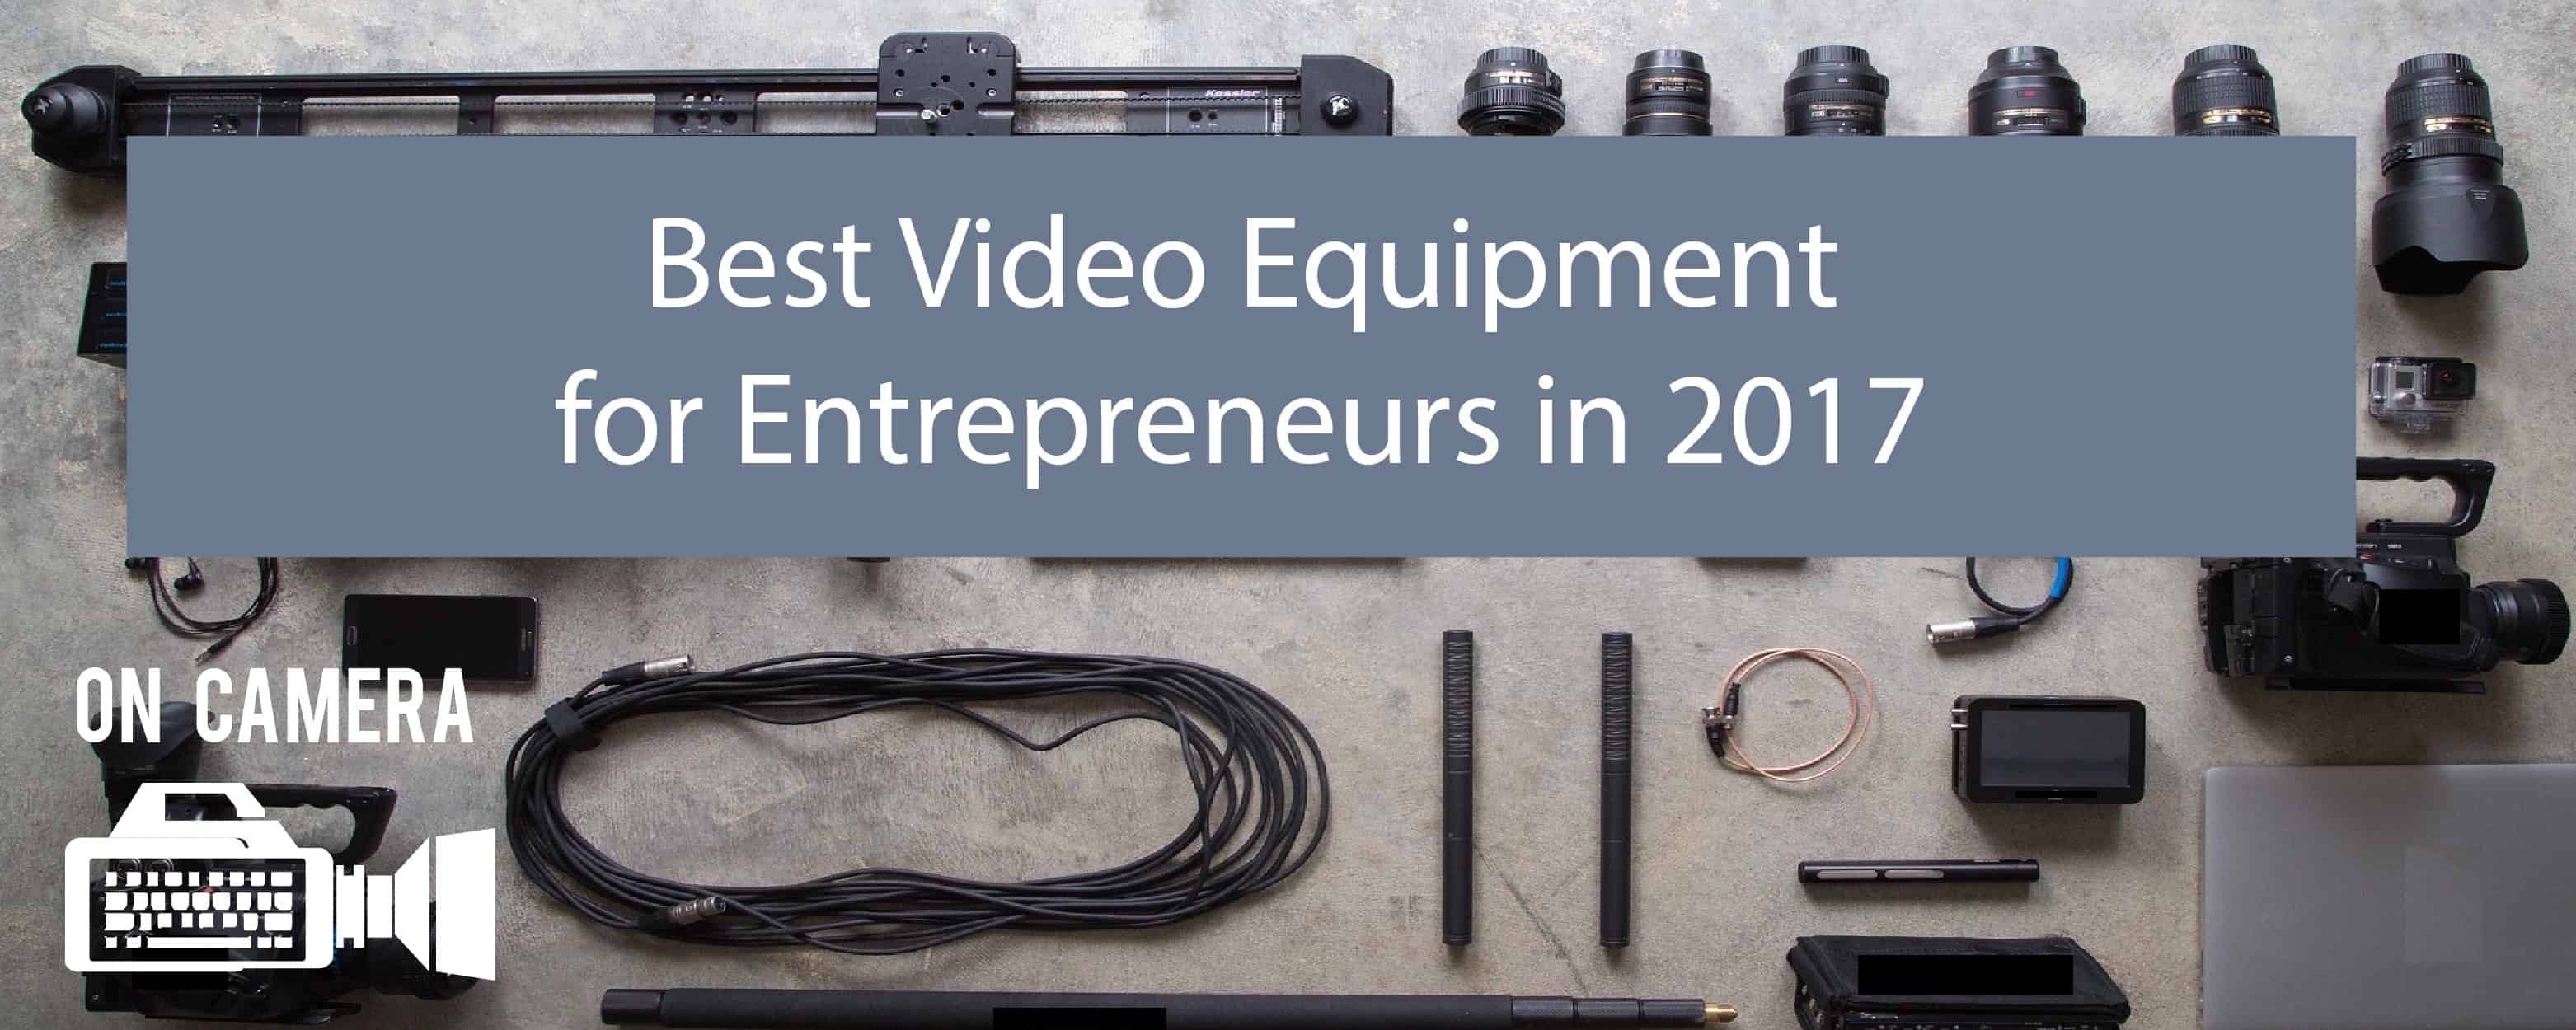 best video equipment for recording lectures